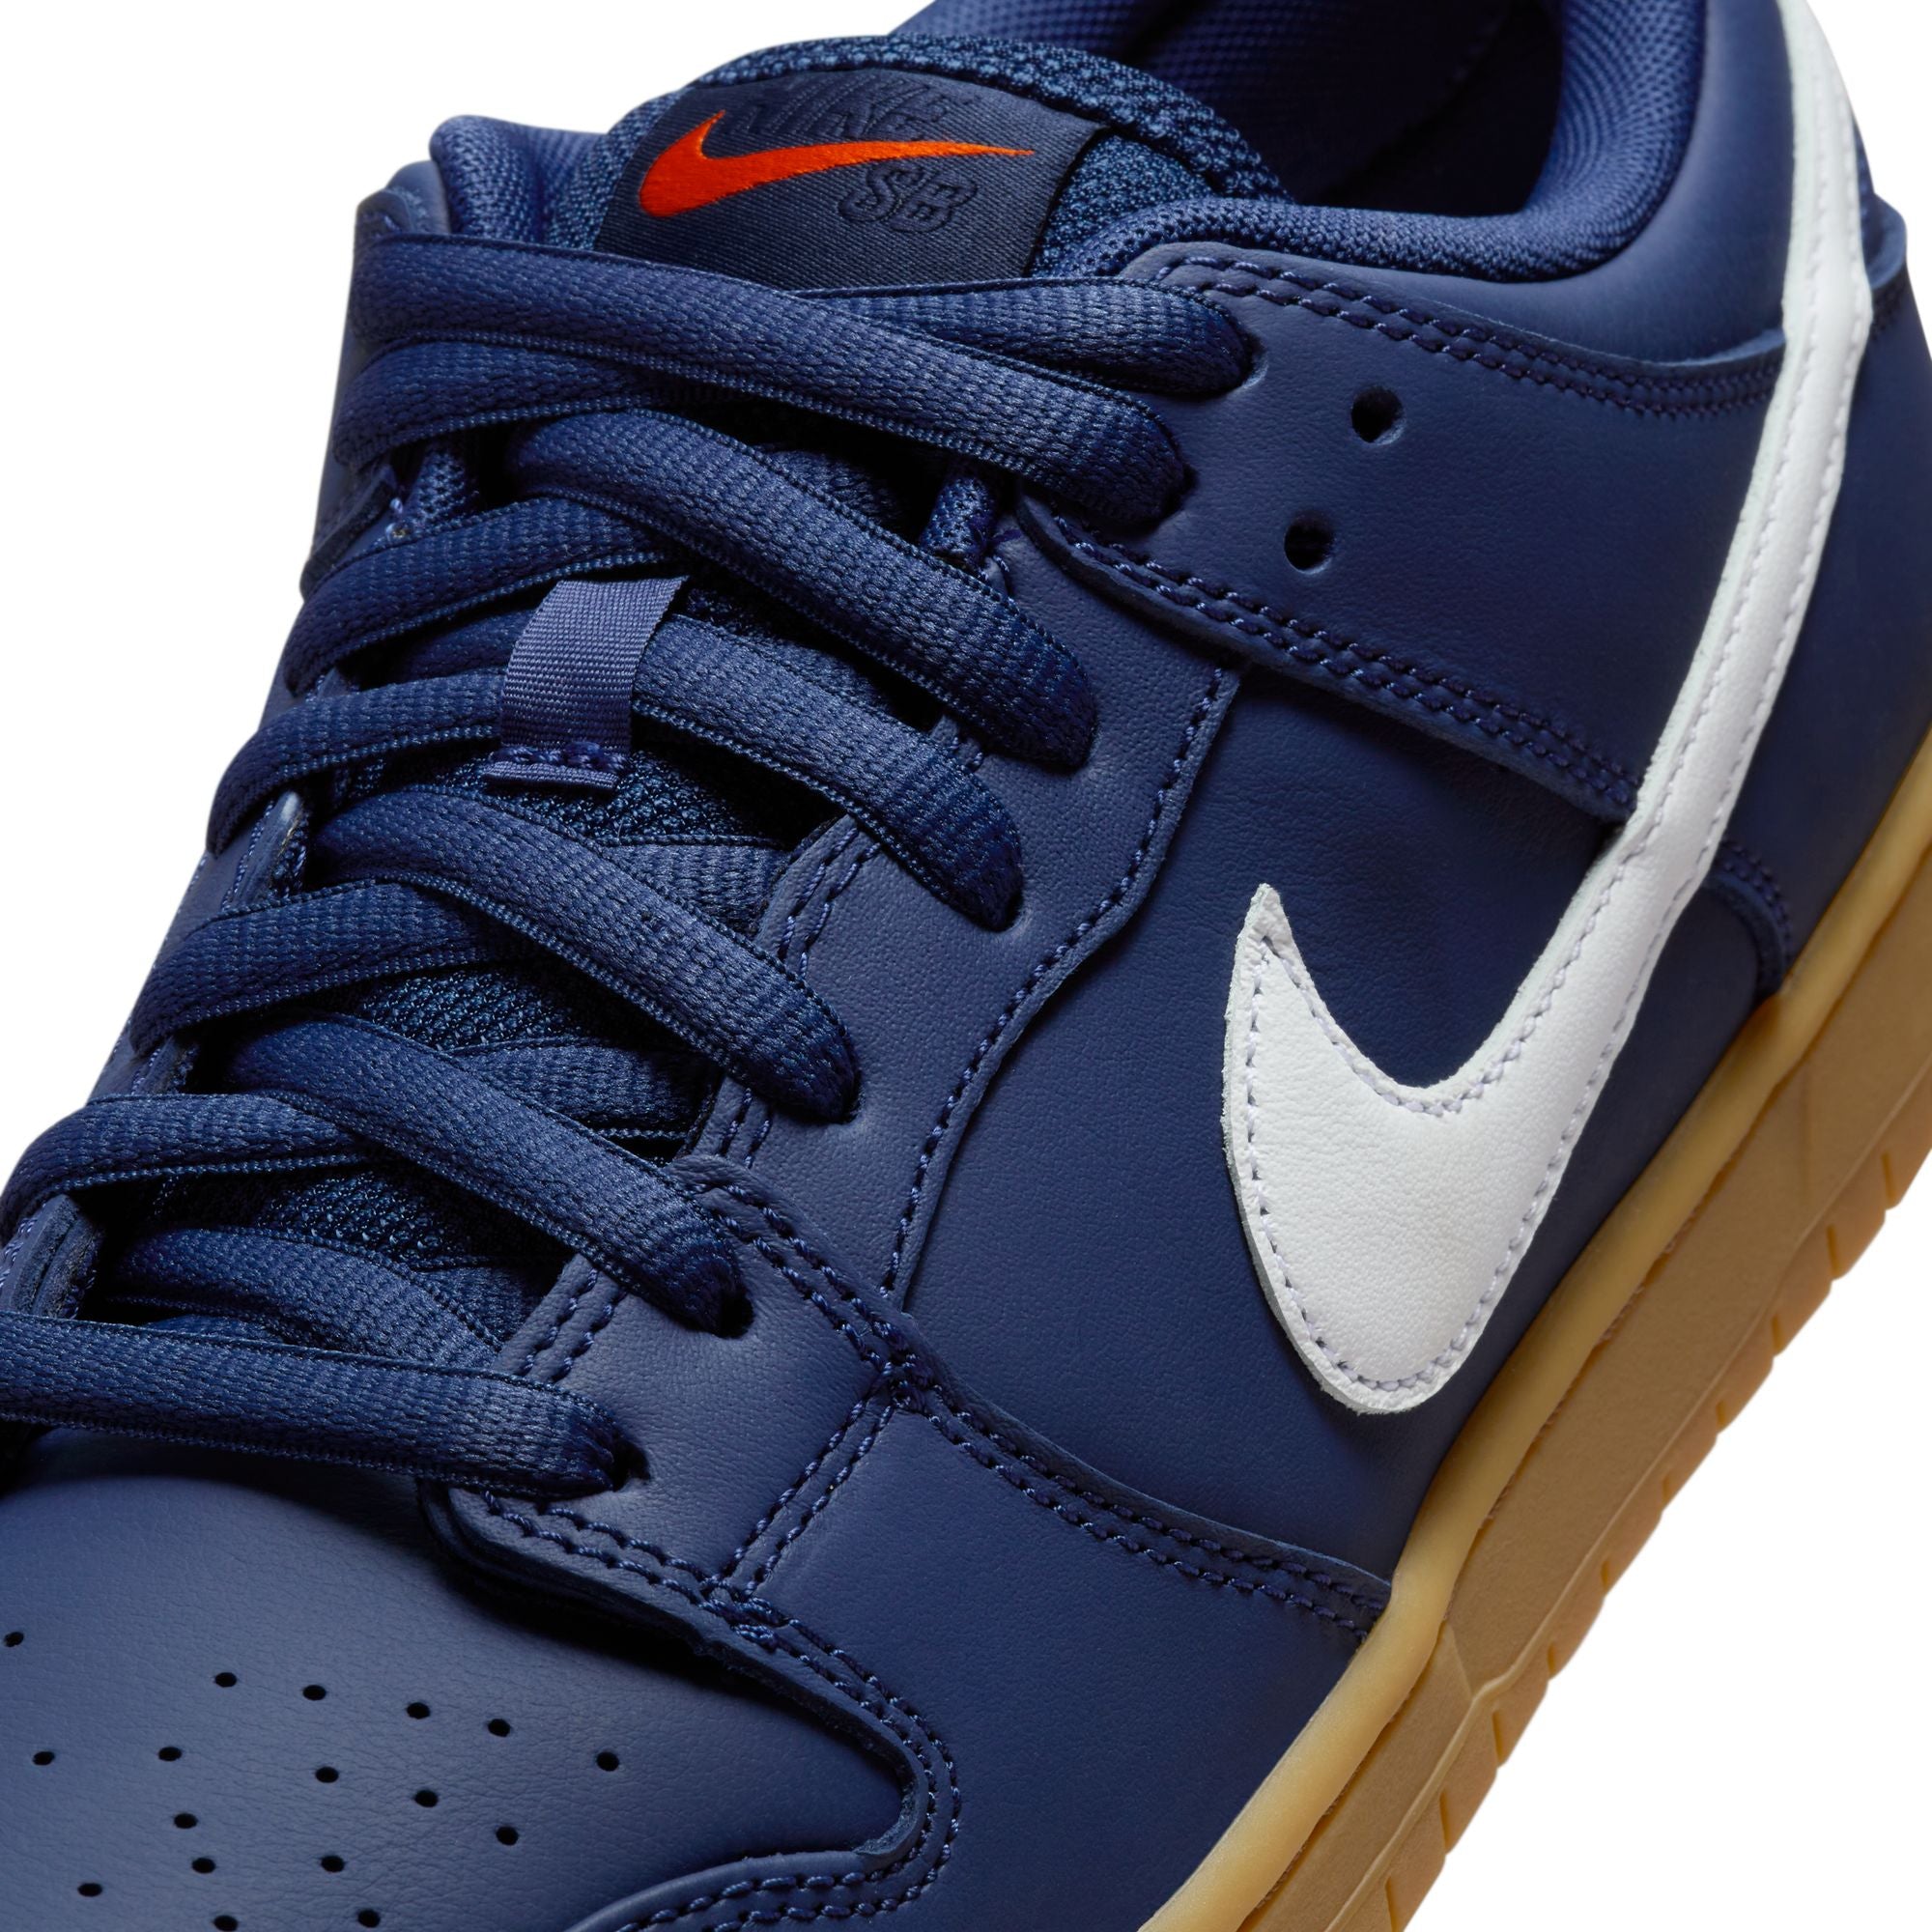 Nike SB ISO Dunk Low Shoes - Navy/White-Gum-Light Brown